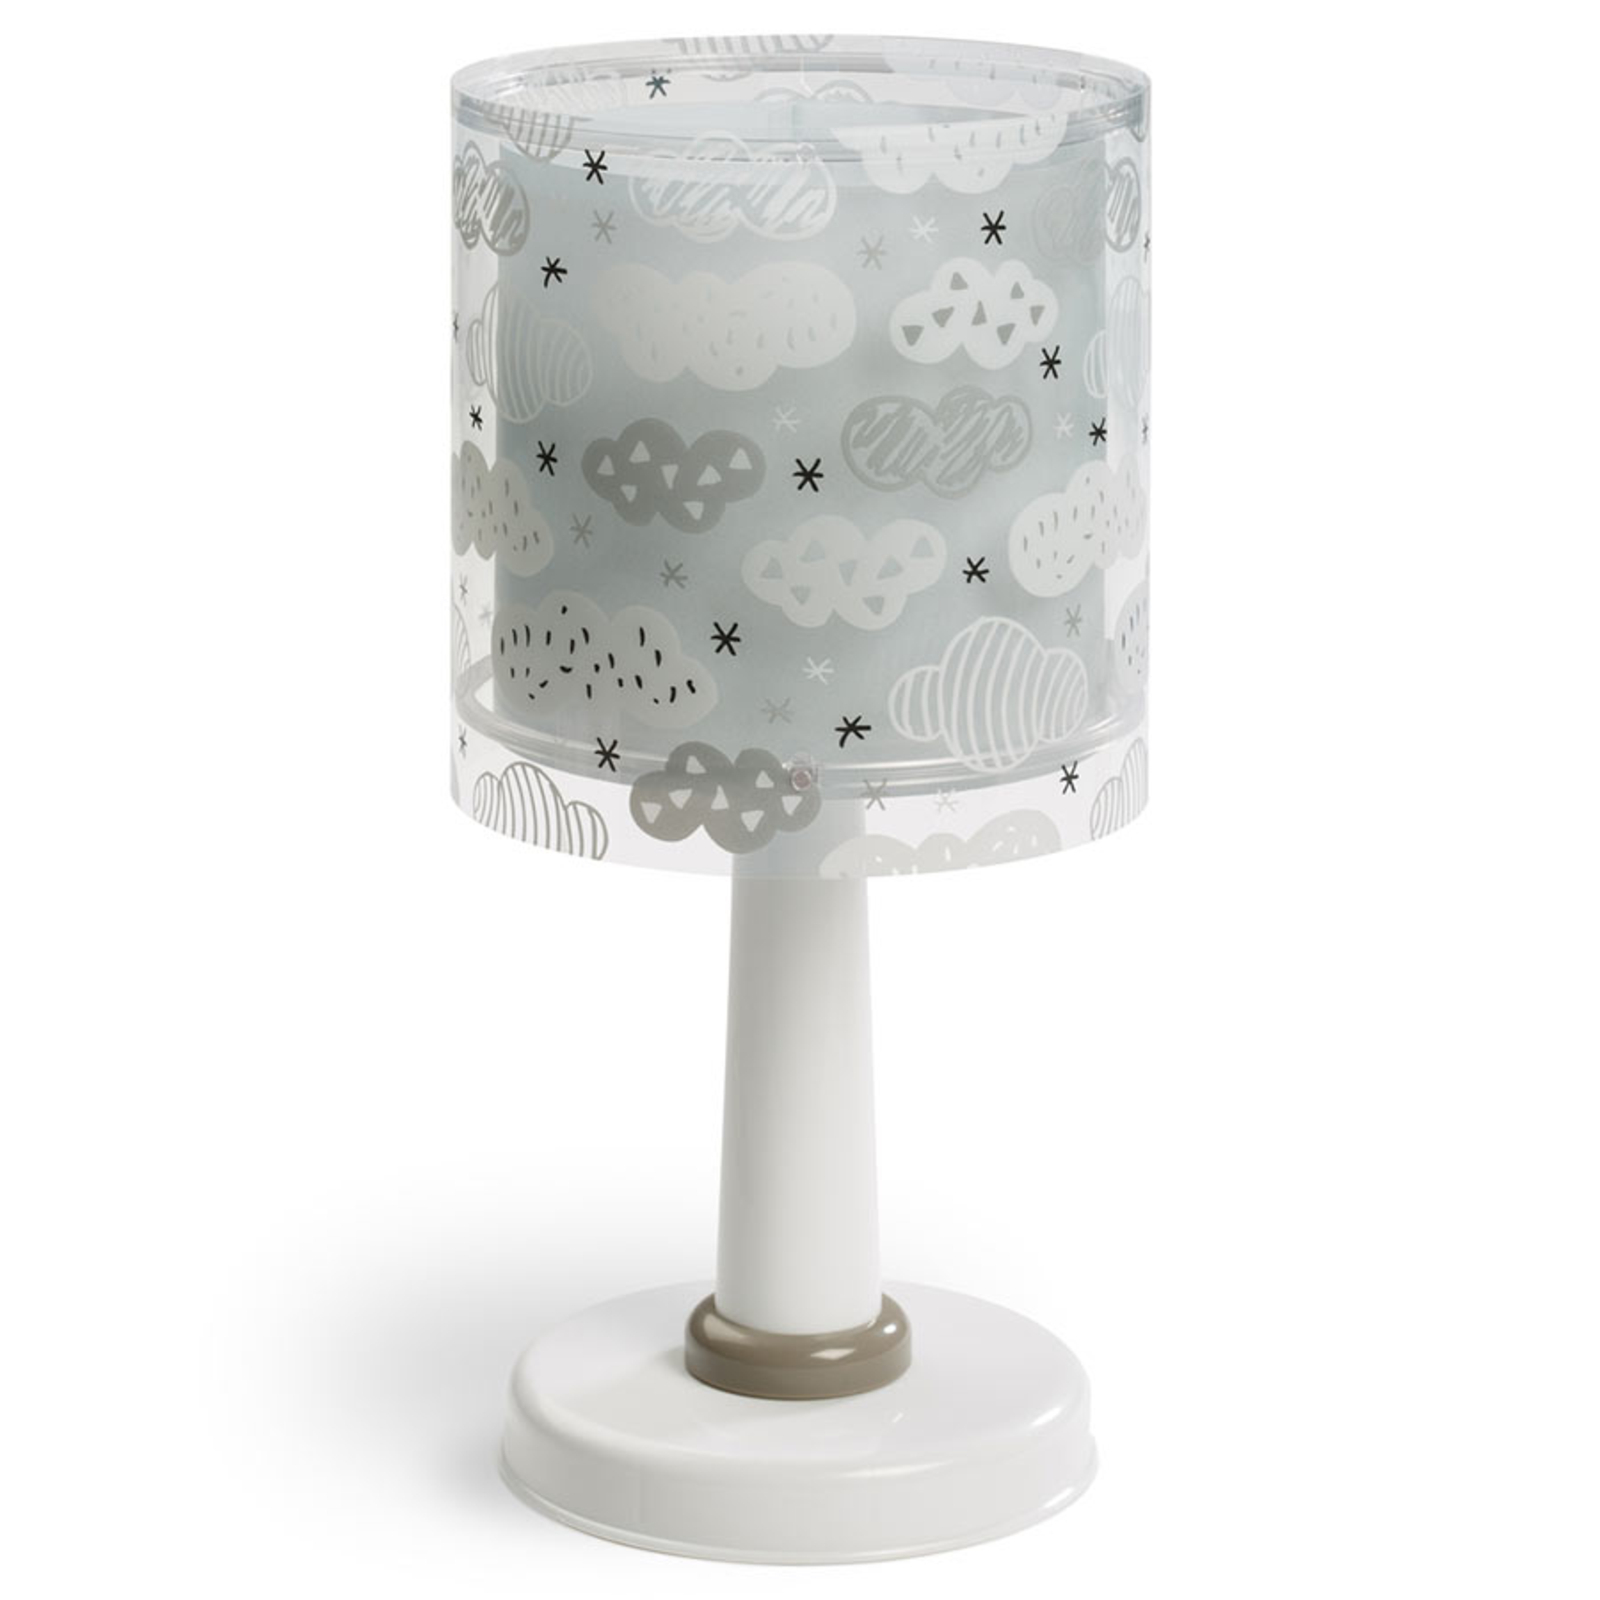 Clouds table lamp for a child’s room, grey